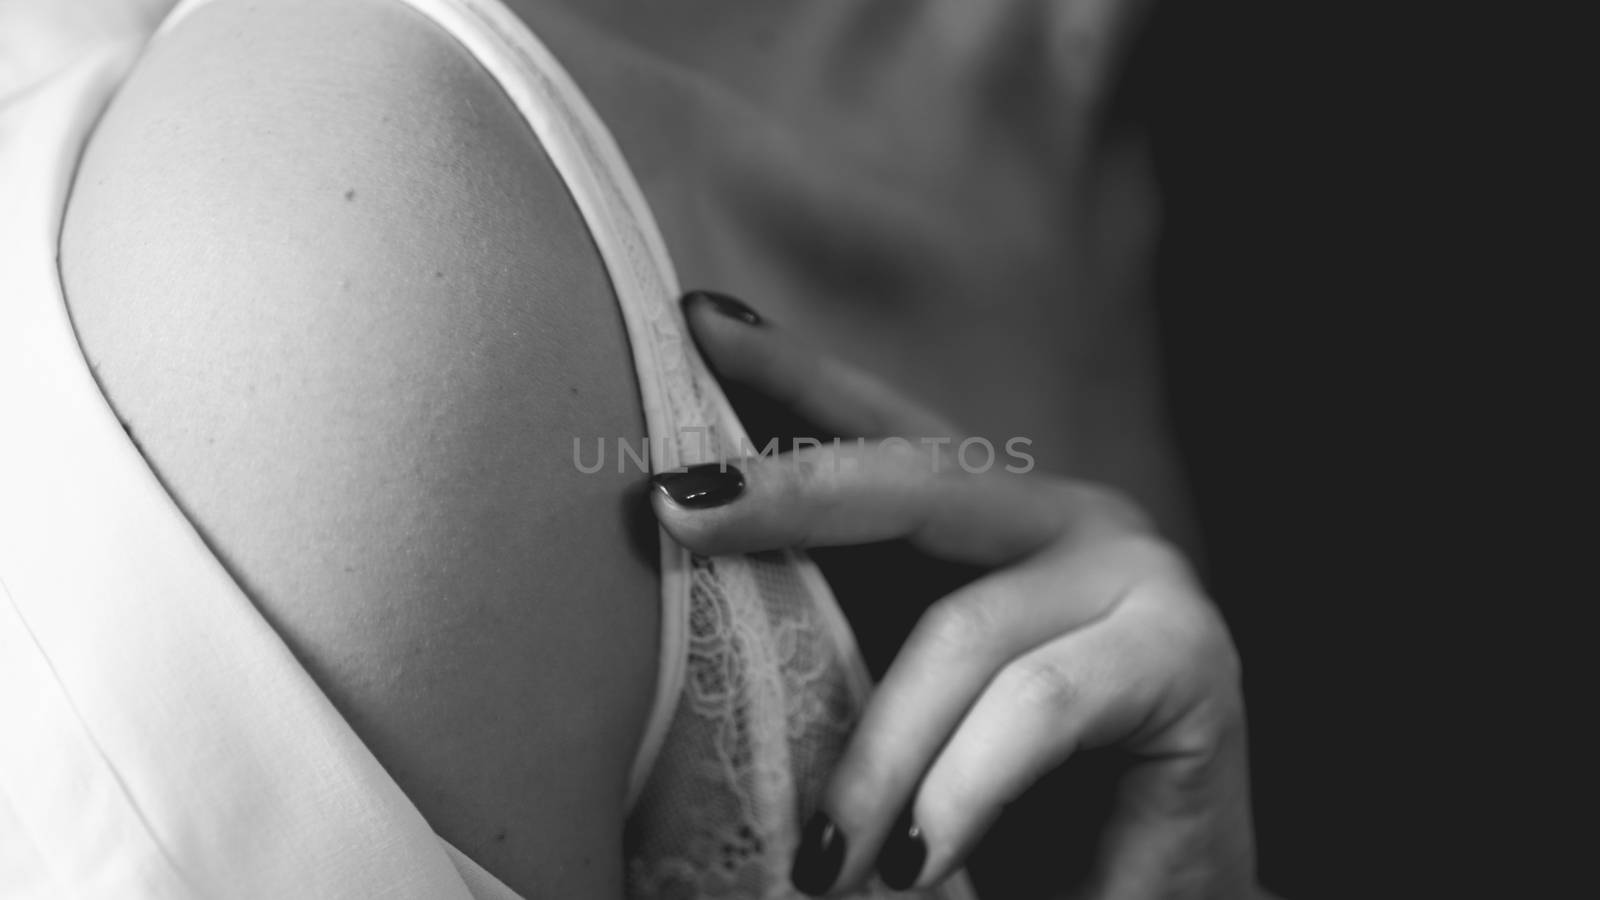 Hands of woman undressing white bra. Hands of woman undressing brassiere. Close-up nude photo